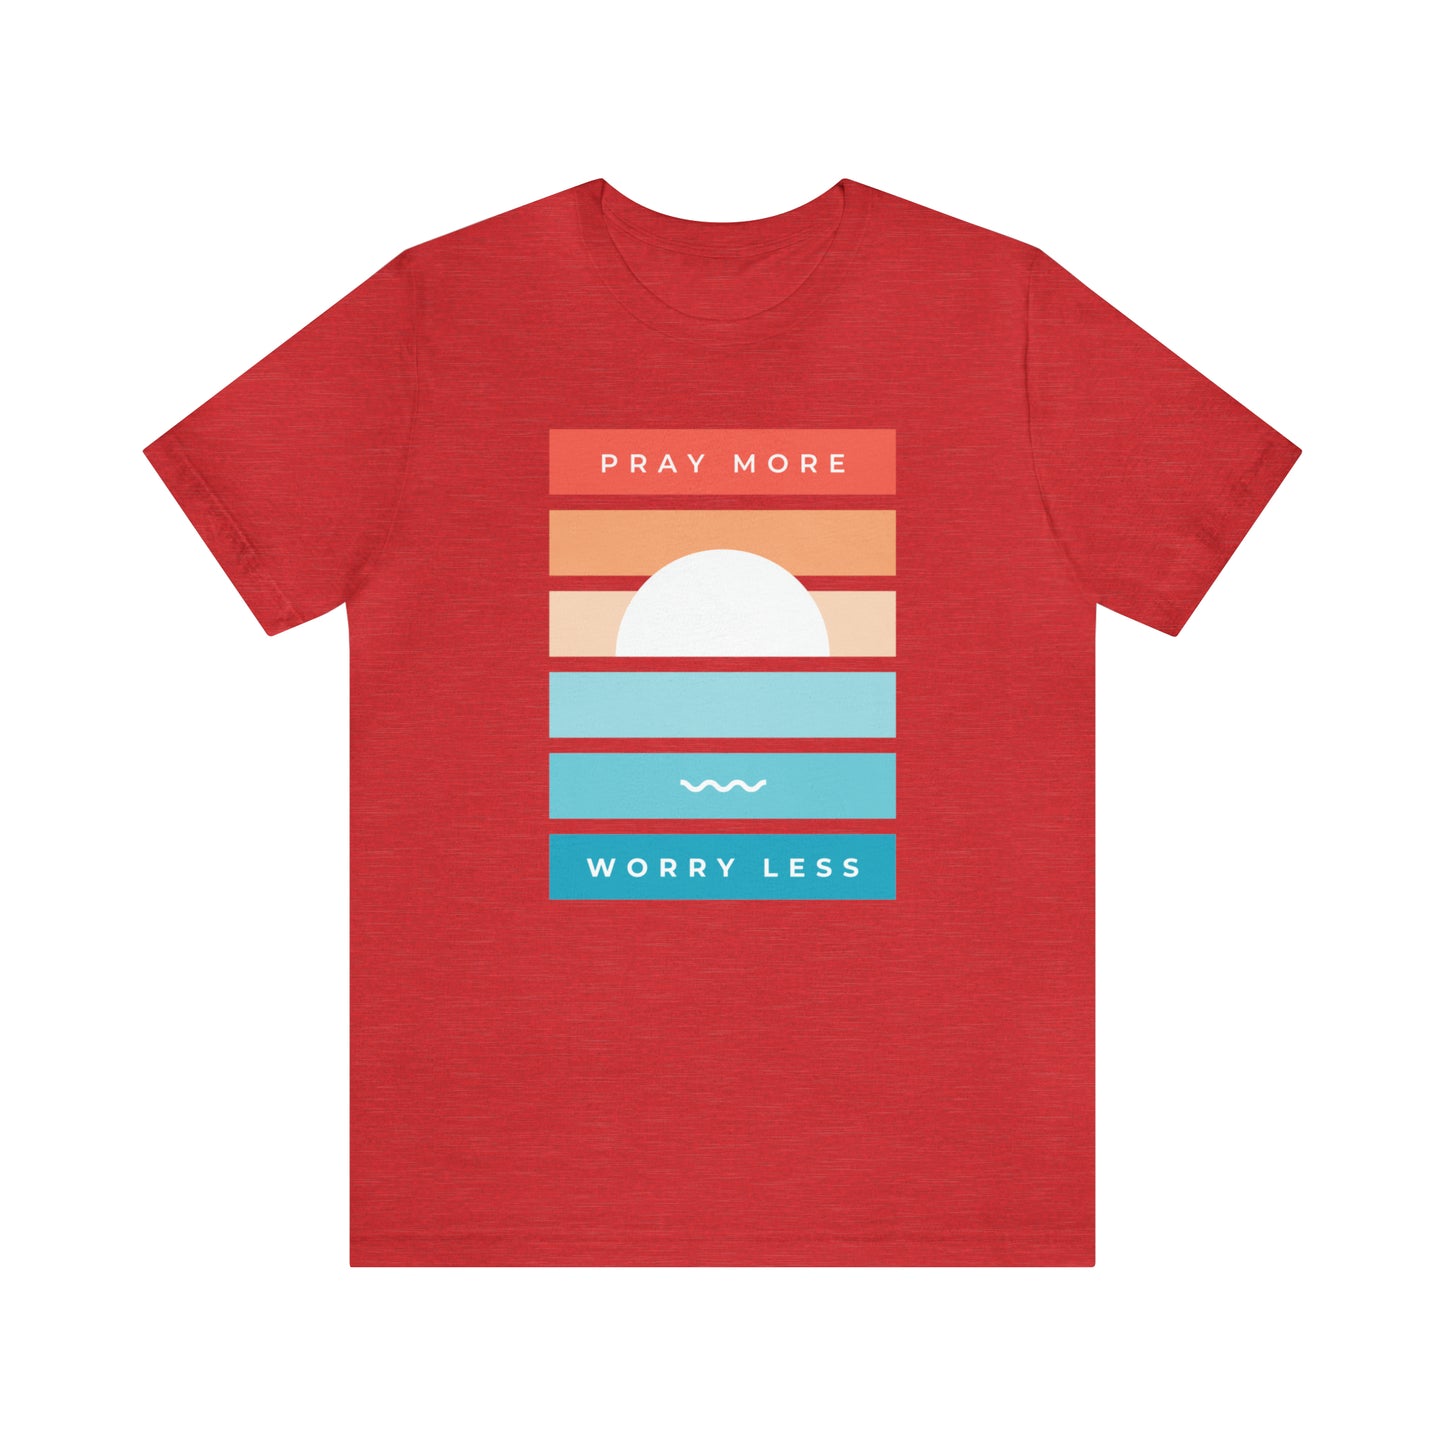  Sunset Graphic Christian Tee heather red